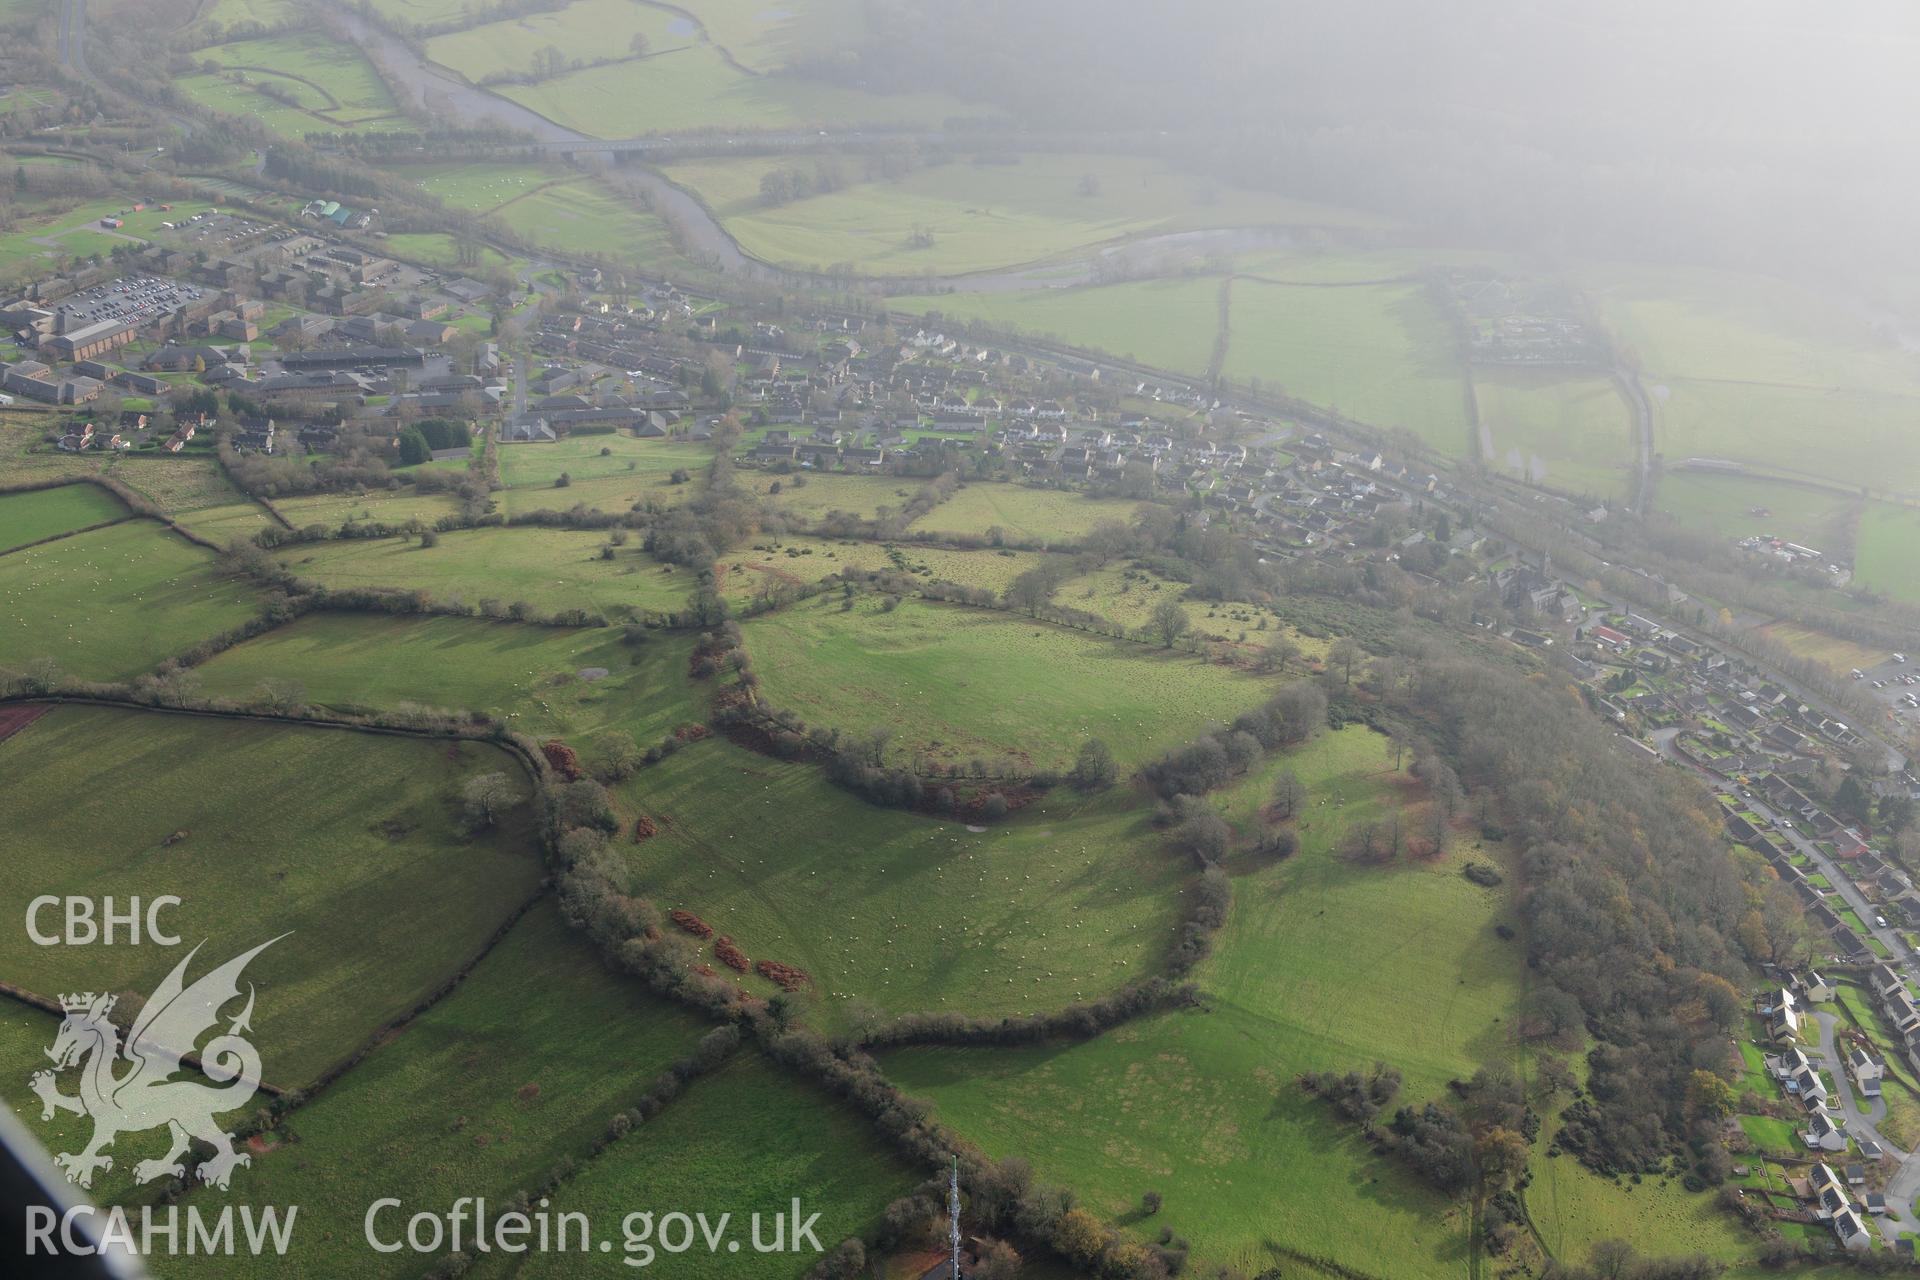 RCAHMW colour oblique photograph of Slwch Tump hillfort. Taken by Toby Driver on 23/11/2012.